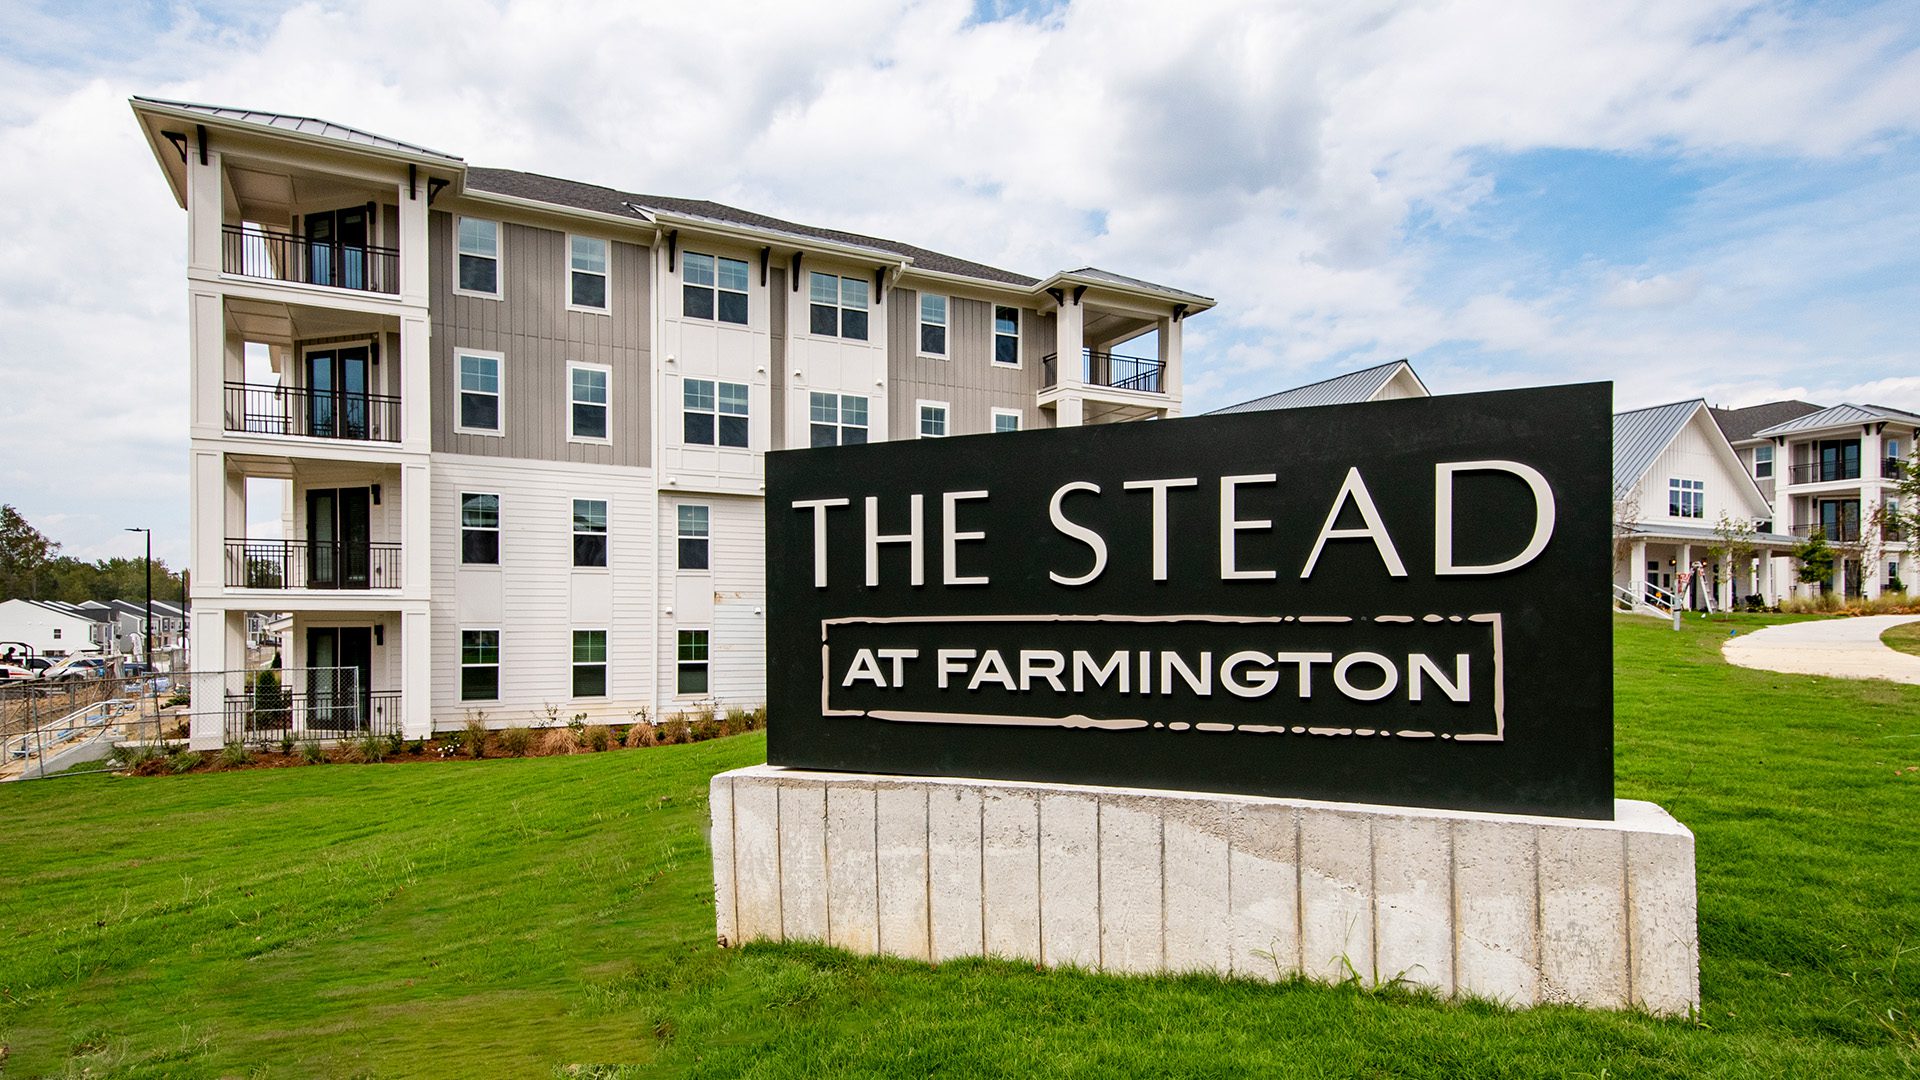 The Stead at Farmington sign for 3-story apartment buildings in the background